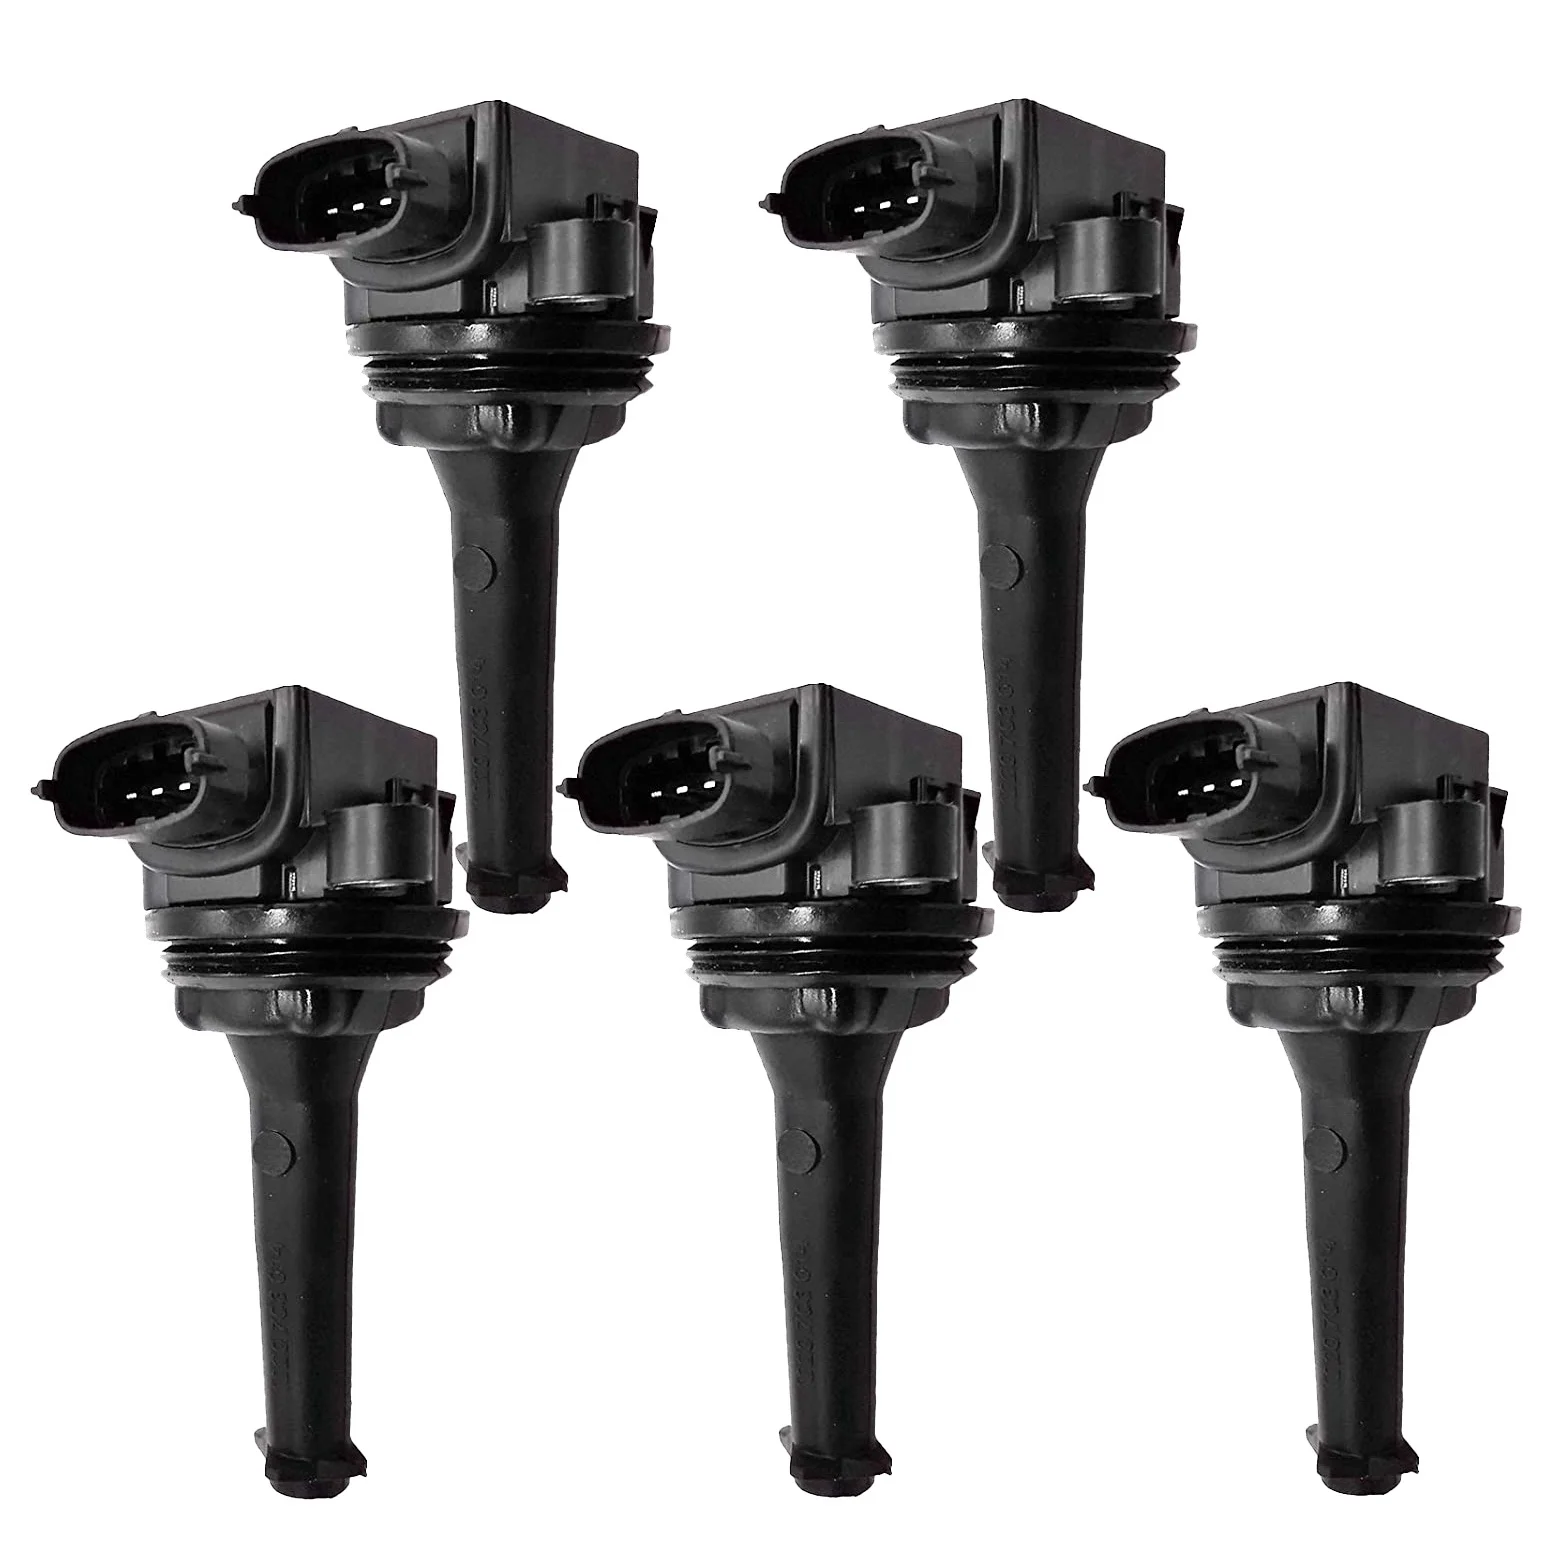 

5PCS Ignition Coil Fit for Volvo C70 S60 S70 S80 V70 XC70 XC90 2.0 2.3 2.4 2.5 T5 30713416 9125601